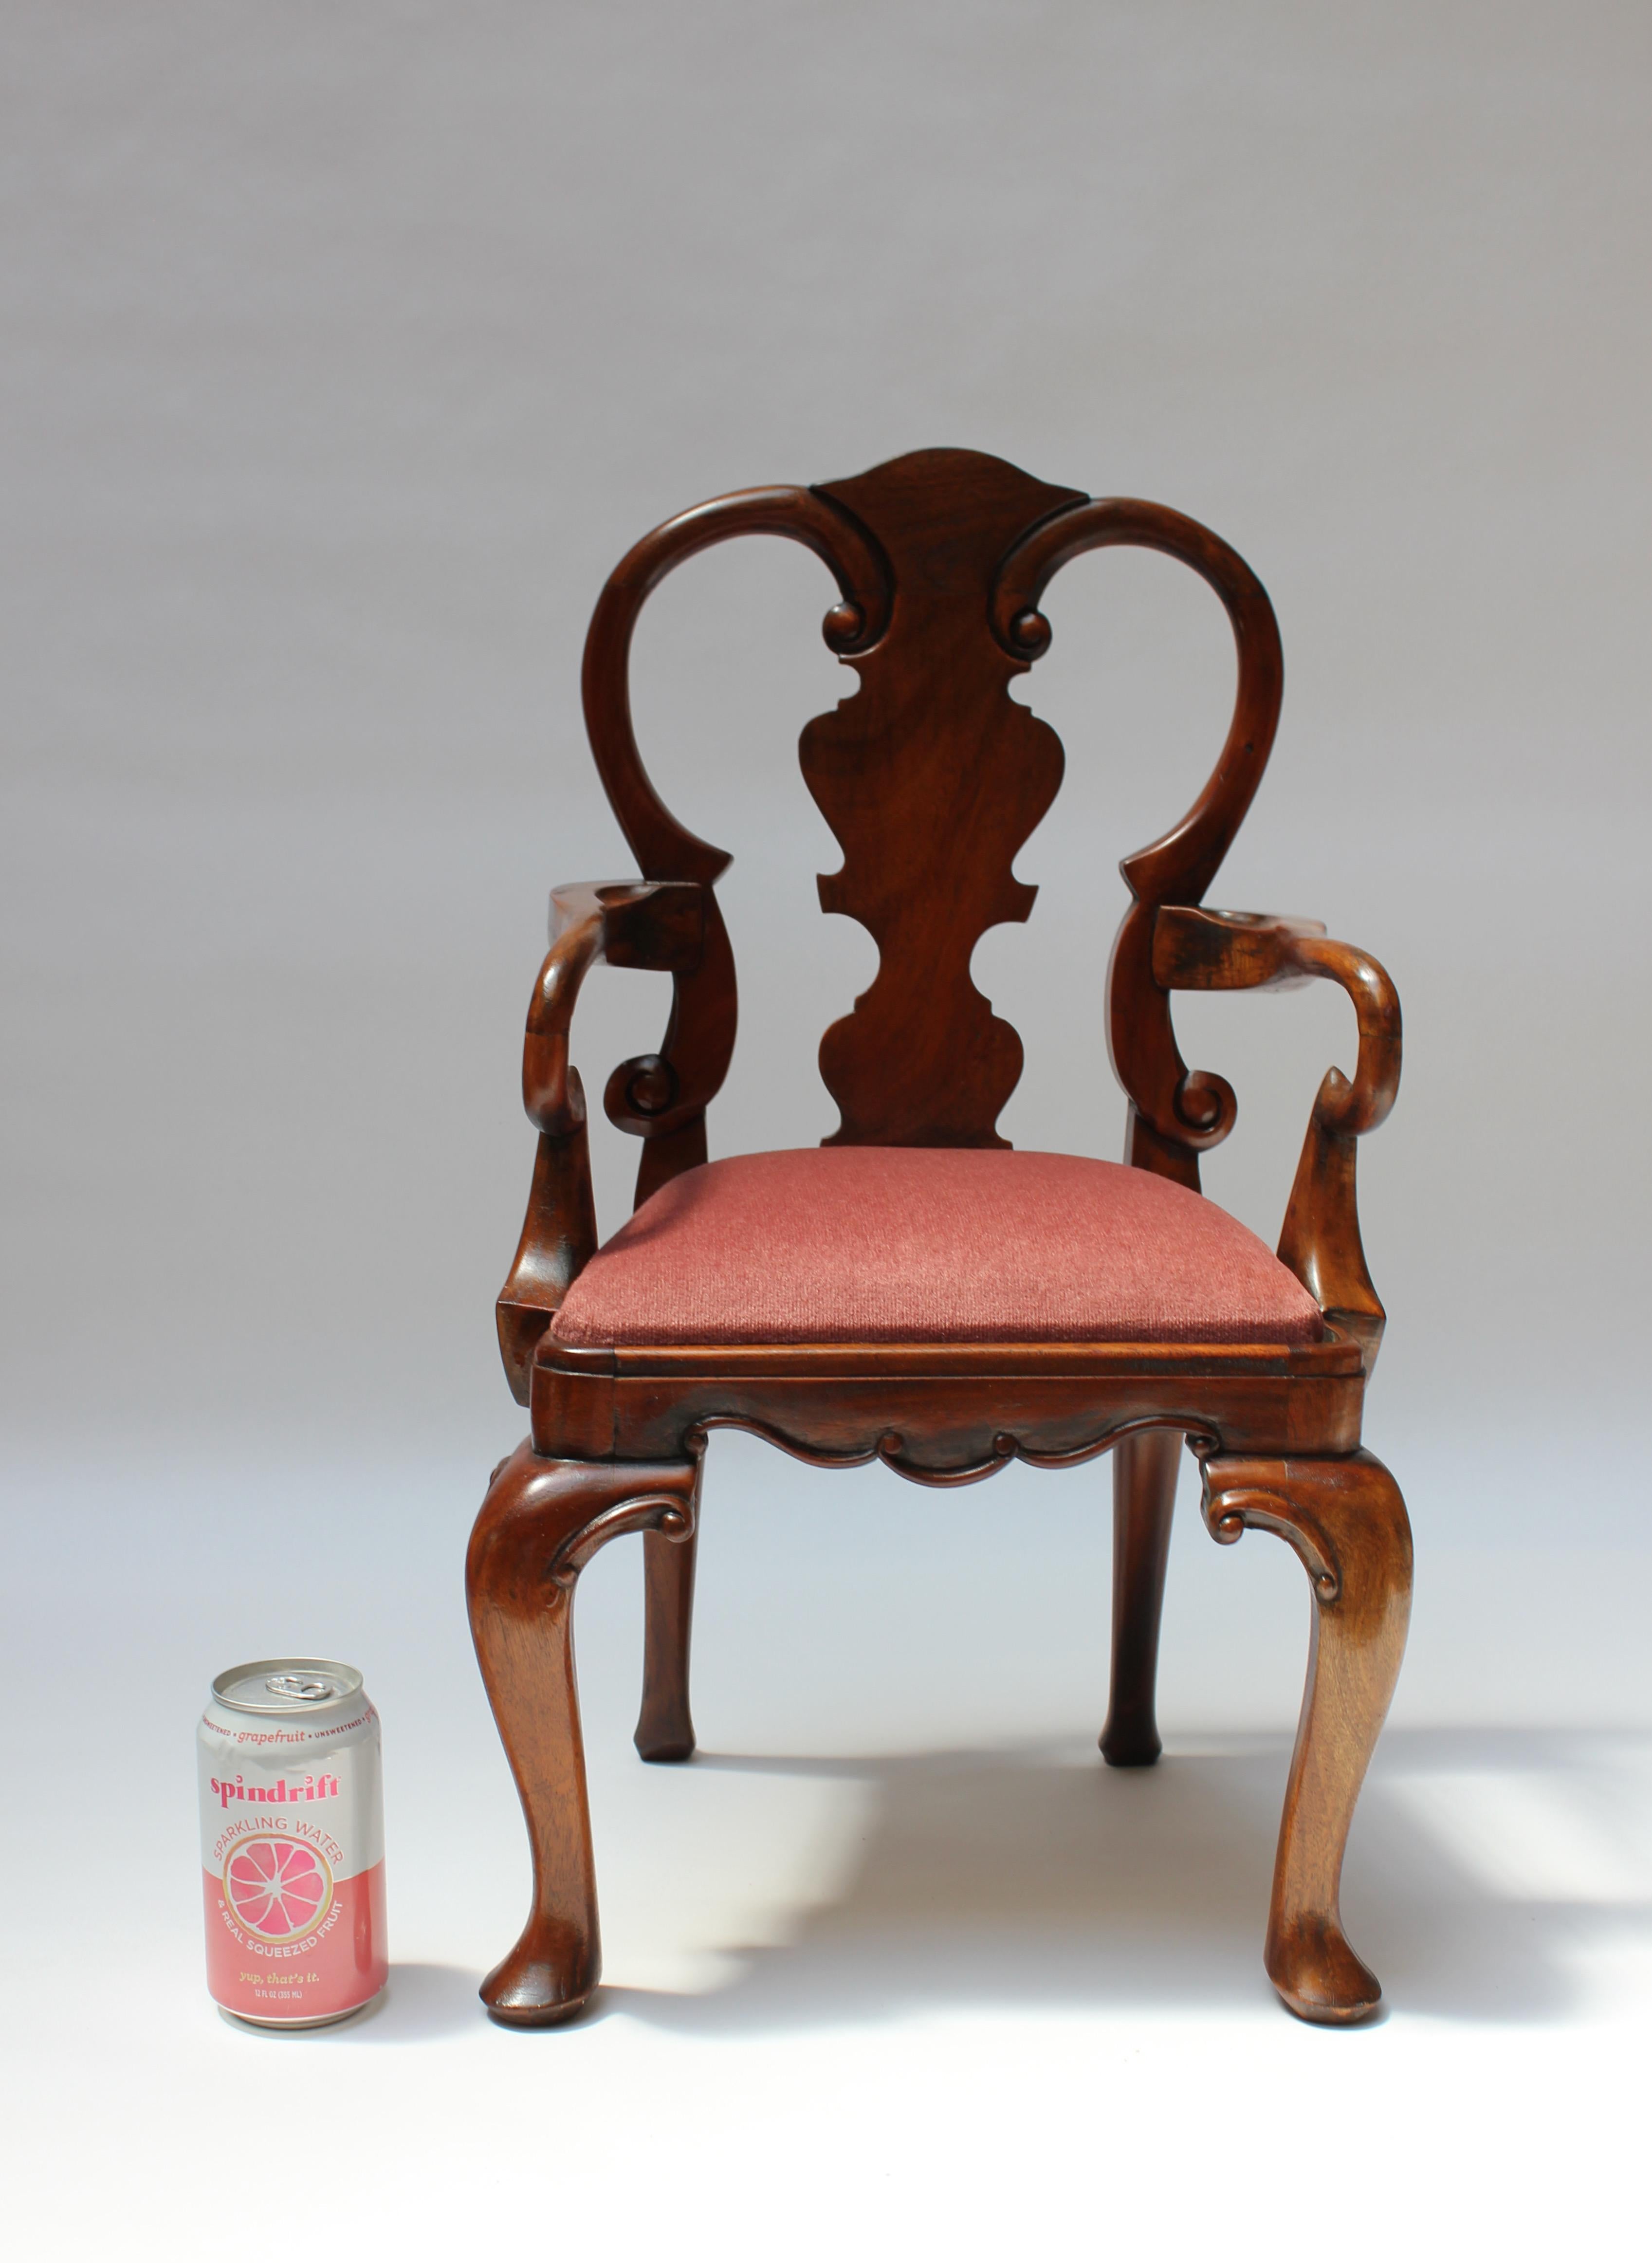 Miniature Queen Anne-style captain's / armchair, likely crafted as a Salesman Sample to advertise the full size model (ca. 1950s, England). 
Carved from solid cherrywood with dramatic cabriole legs and a deeply carved slat back. 
Small size: H: